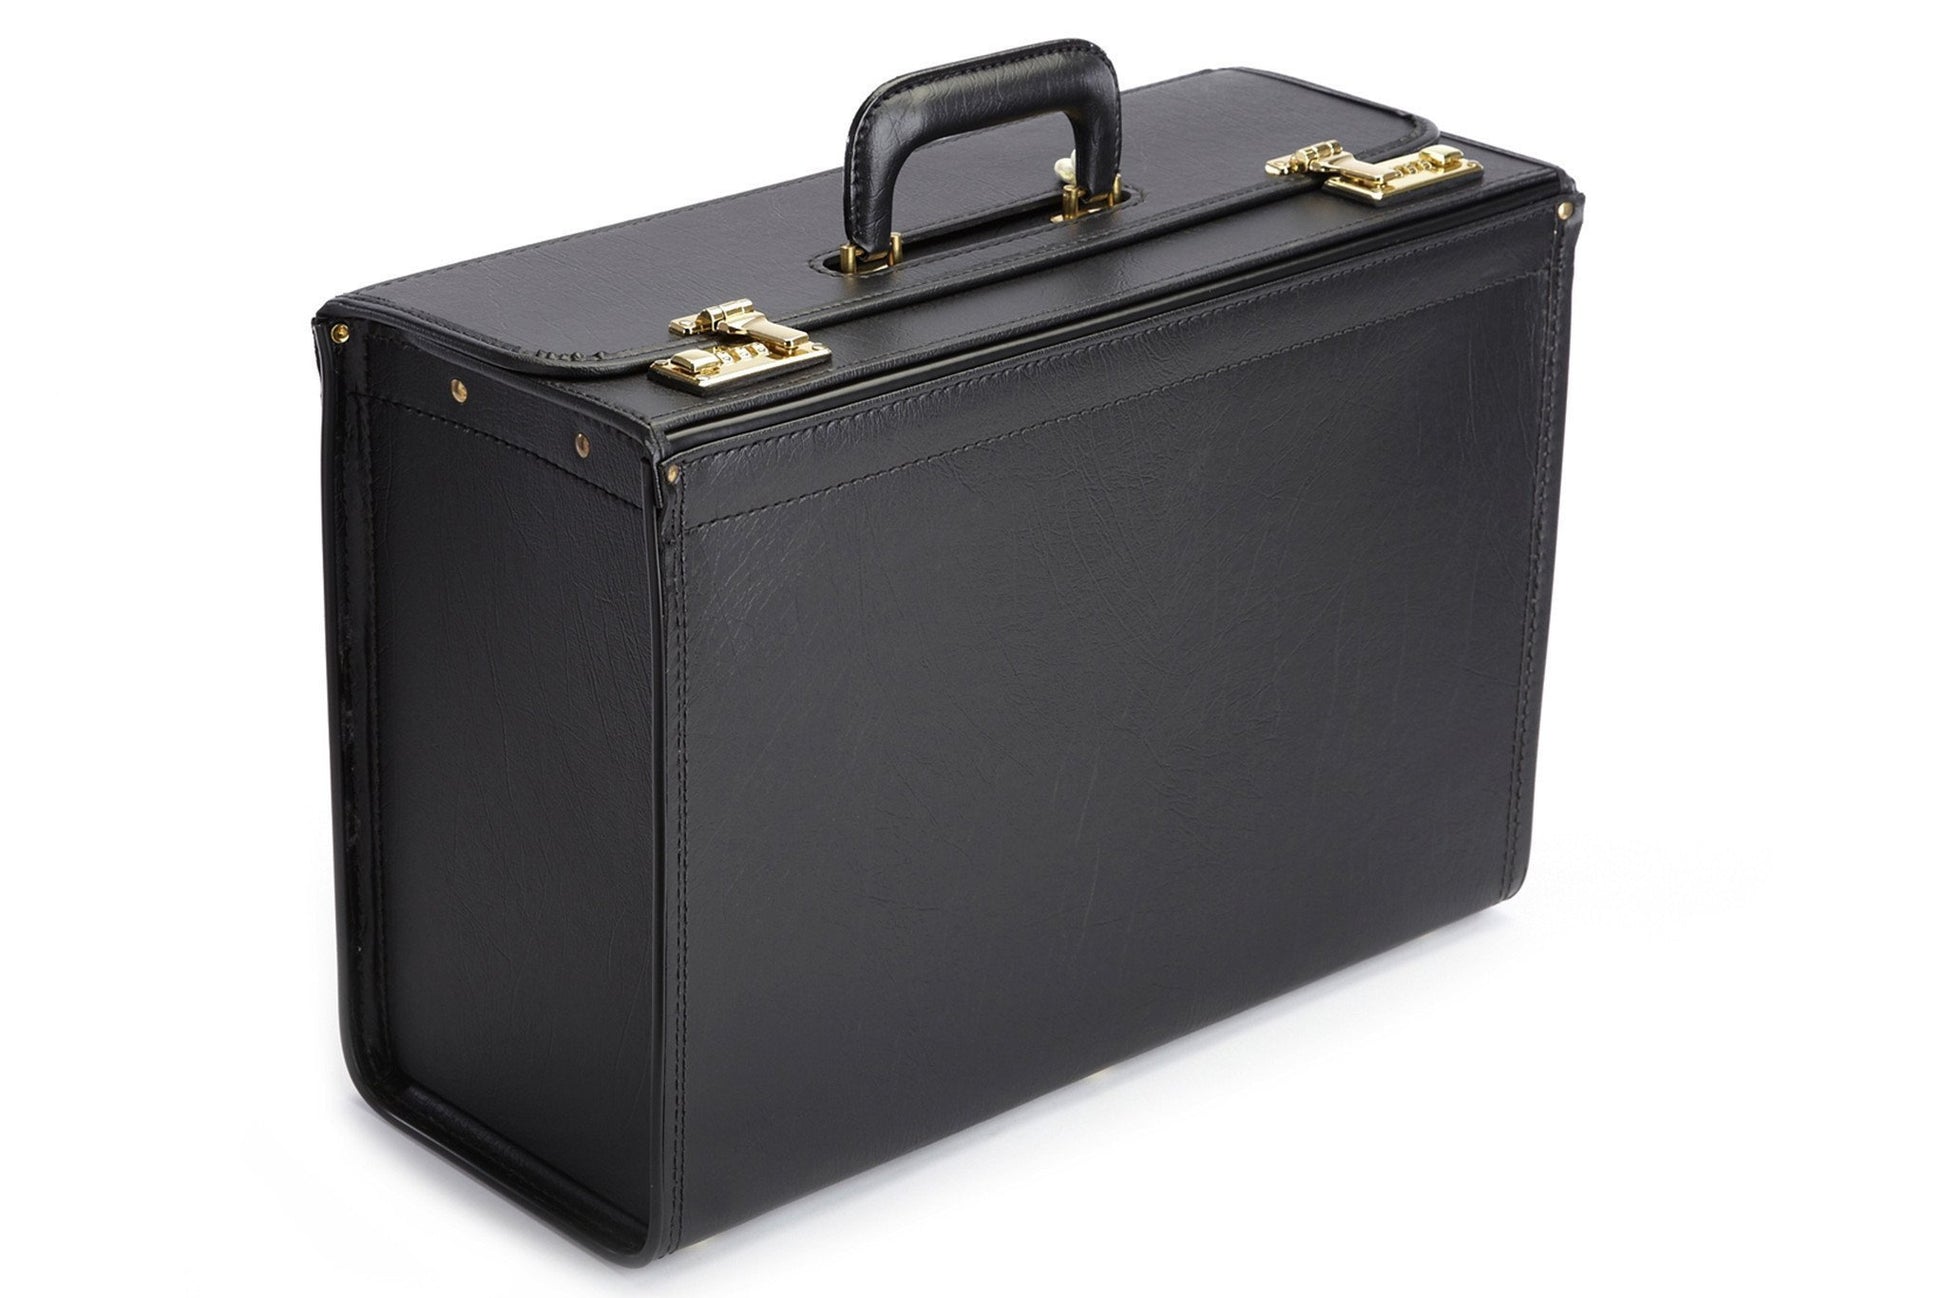 Advocate | 18 Inch Catalog Case | Vinyl Trial Bag | Light Weight | Personalize | Korchmar-Catalog Case-Sterling-and-Burke